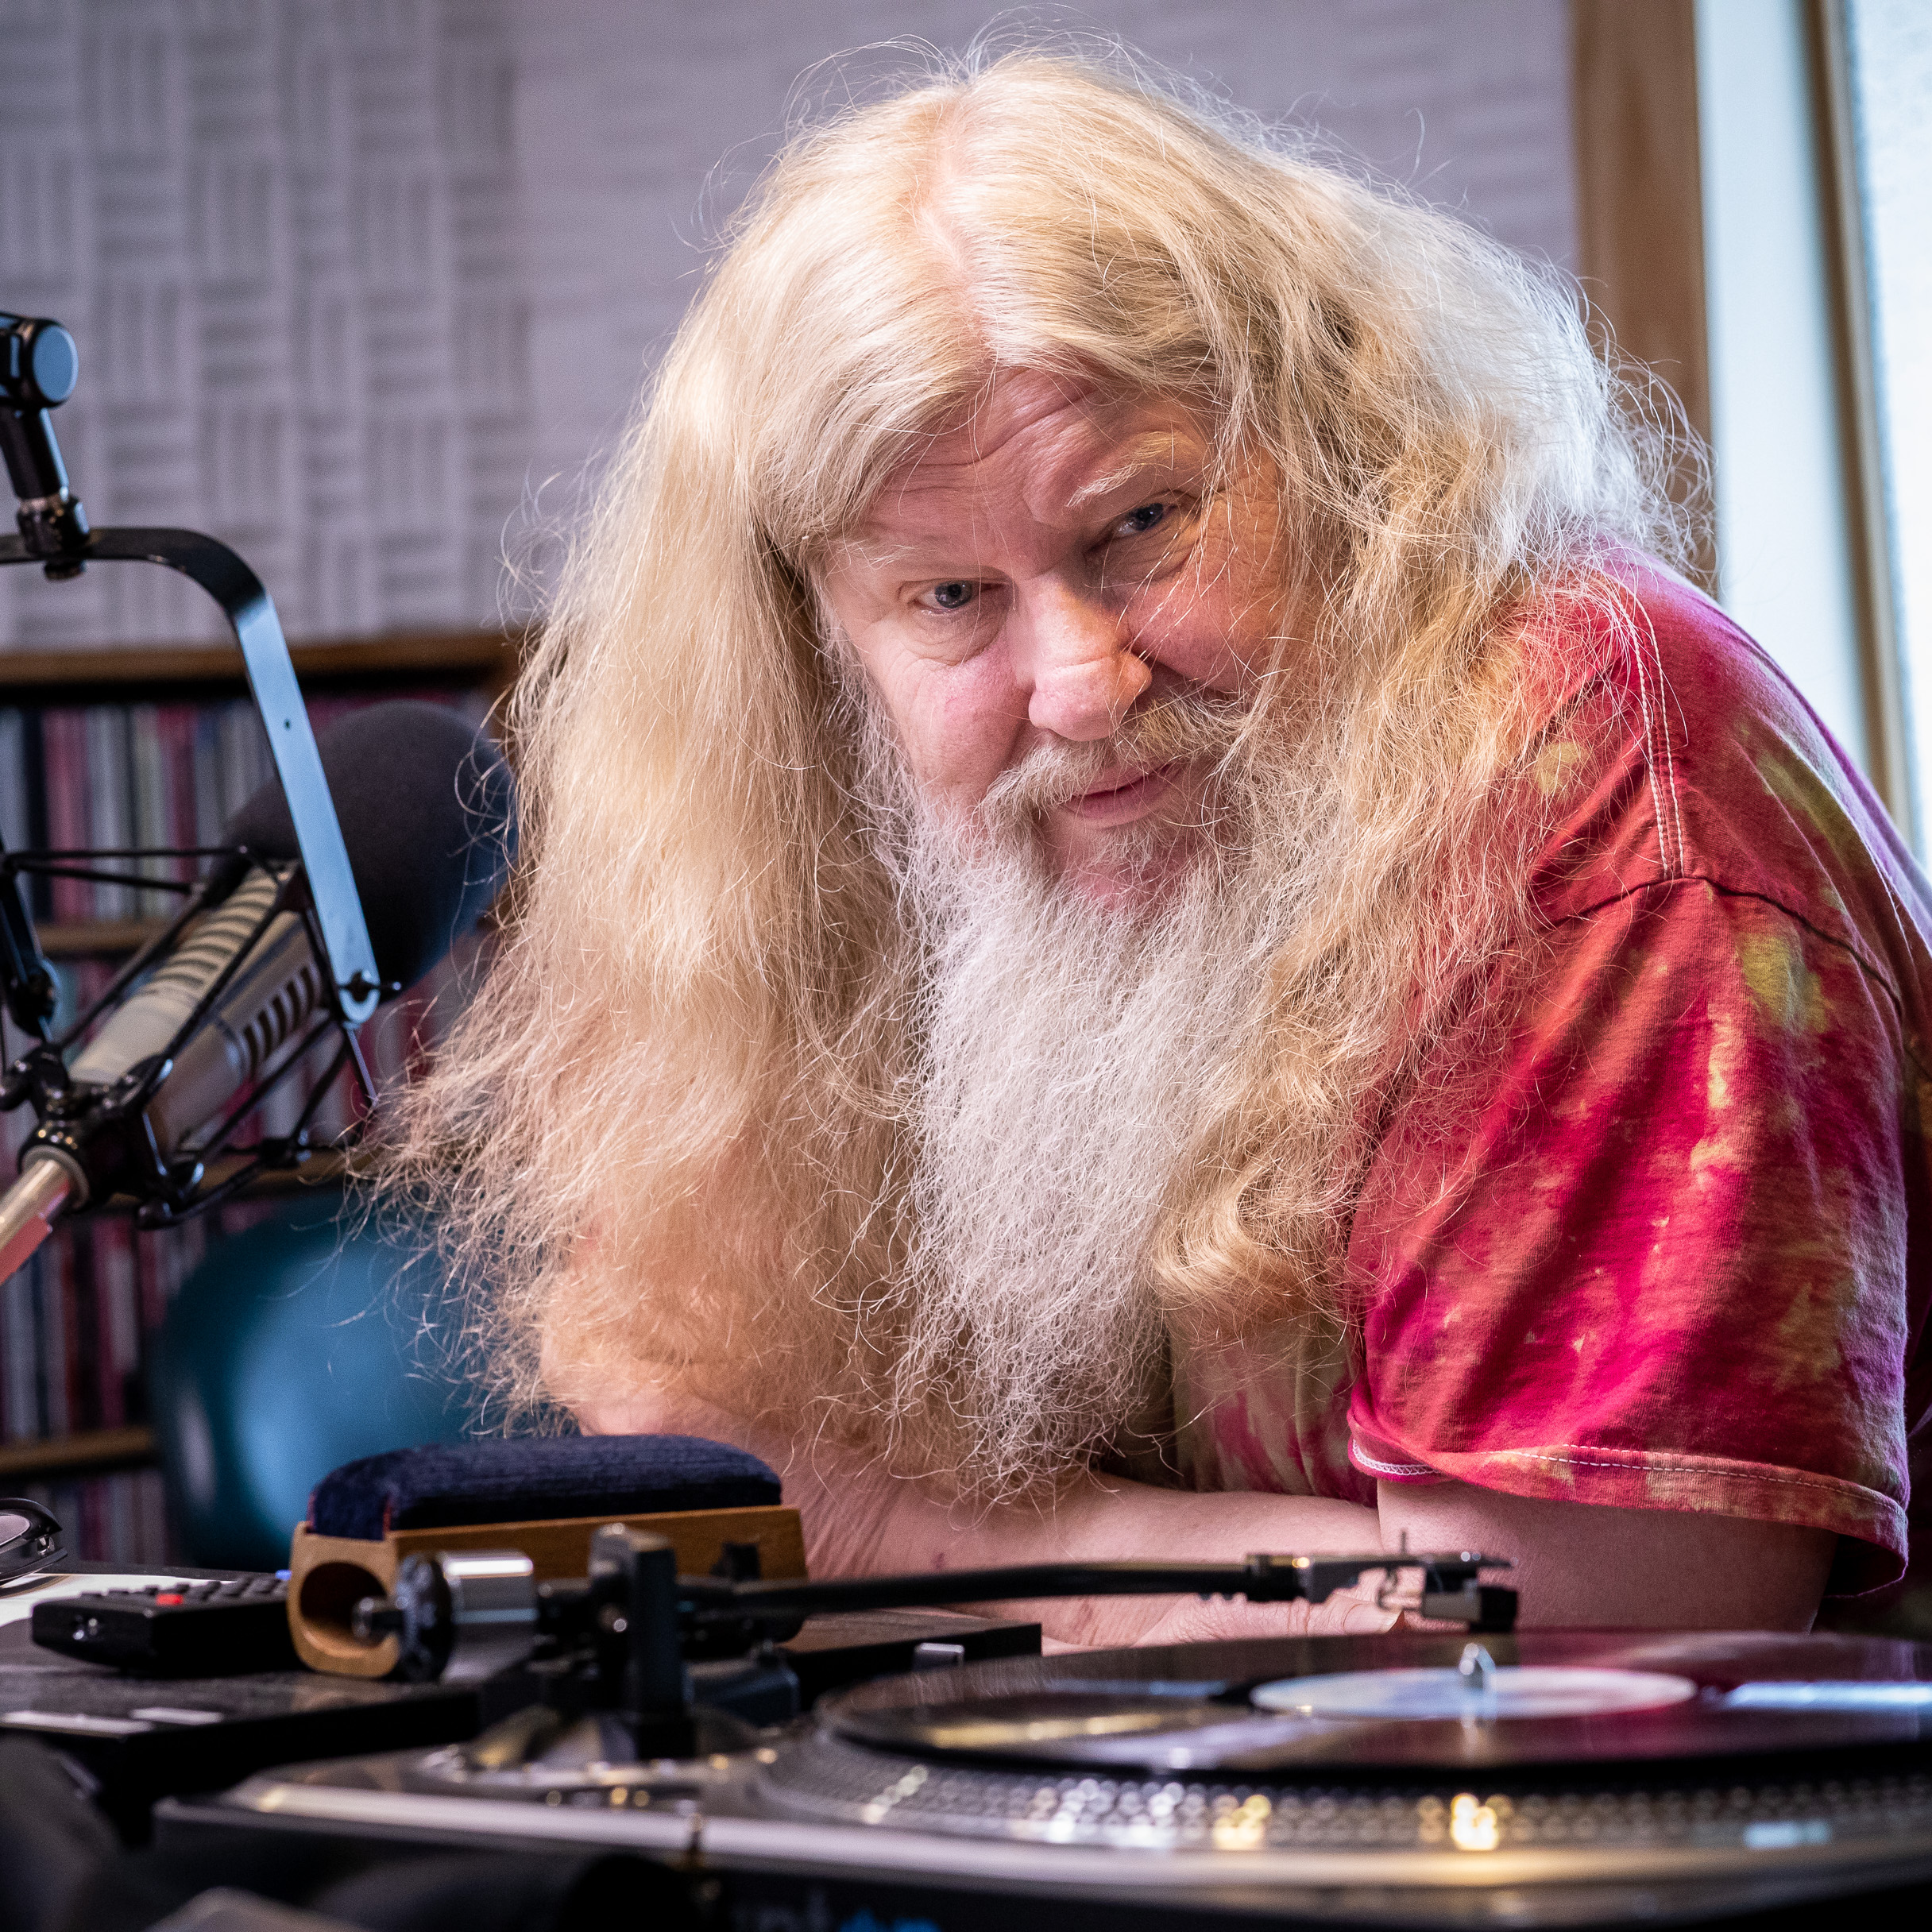 Dave Coler looks at the camera from behind a radio microphone and turntable.